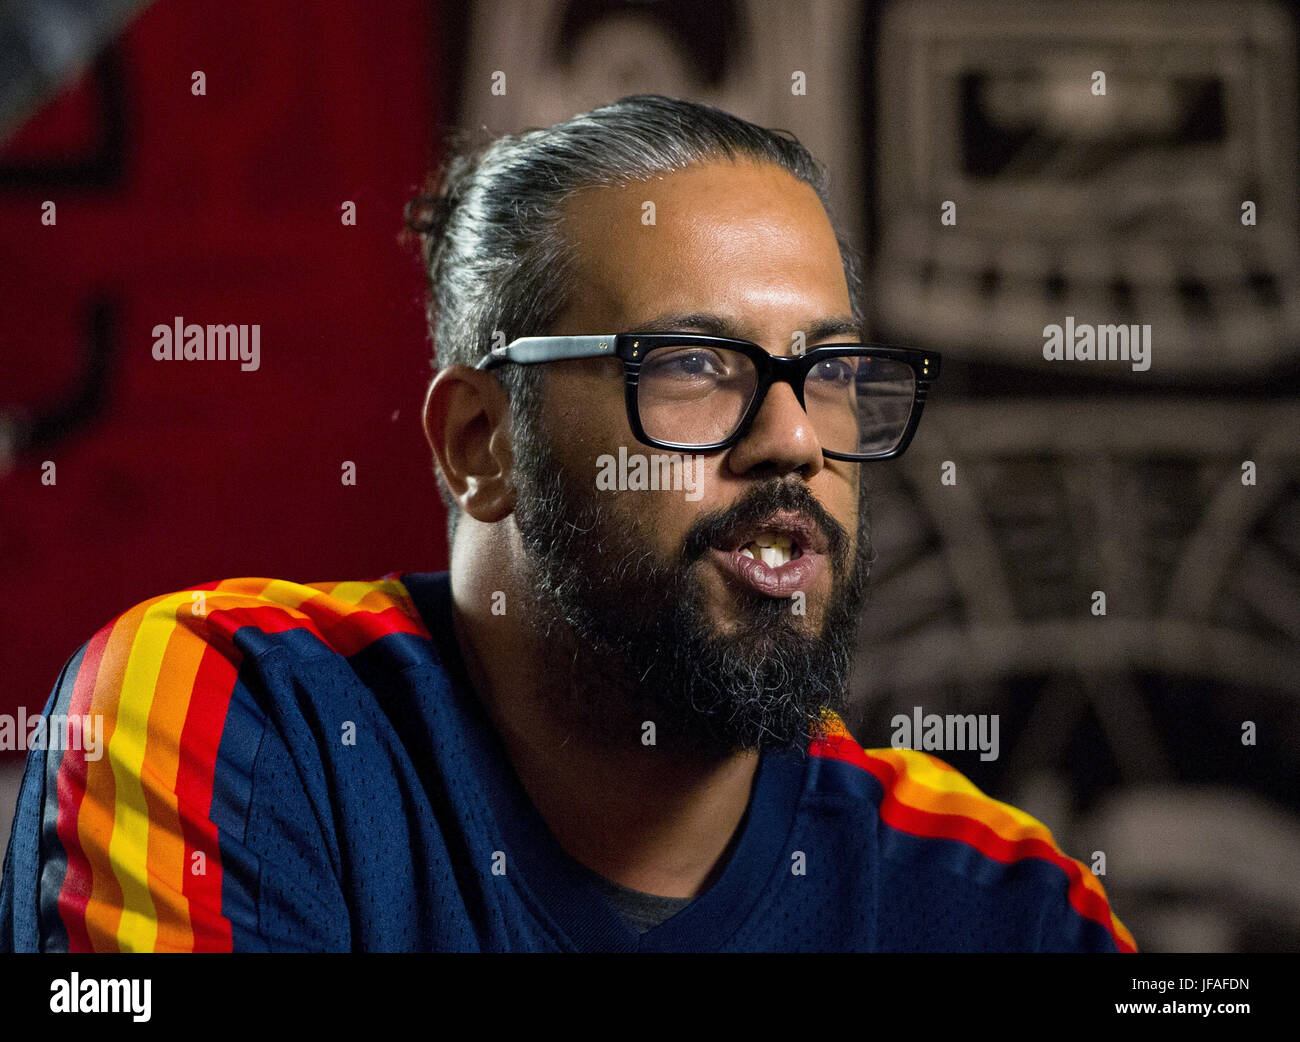 Hamburg, Germany. 22nd June, 2017. Rapper Samy Deluxe, photographed during the presentation of his new song 'Wie tief kann man lieben' (lit. 'How love can you love'), which he recorded together with the chamber music quartet 'Salut Salon', at his restaurant in Hamburg, Germany, 22 June 2017. The single was released on 16 June 2017. Photo: Christina Sabrowsky/dpa/Alamy Live News Stock Photo